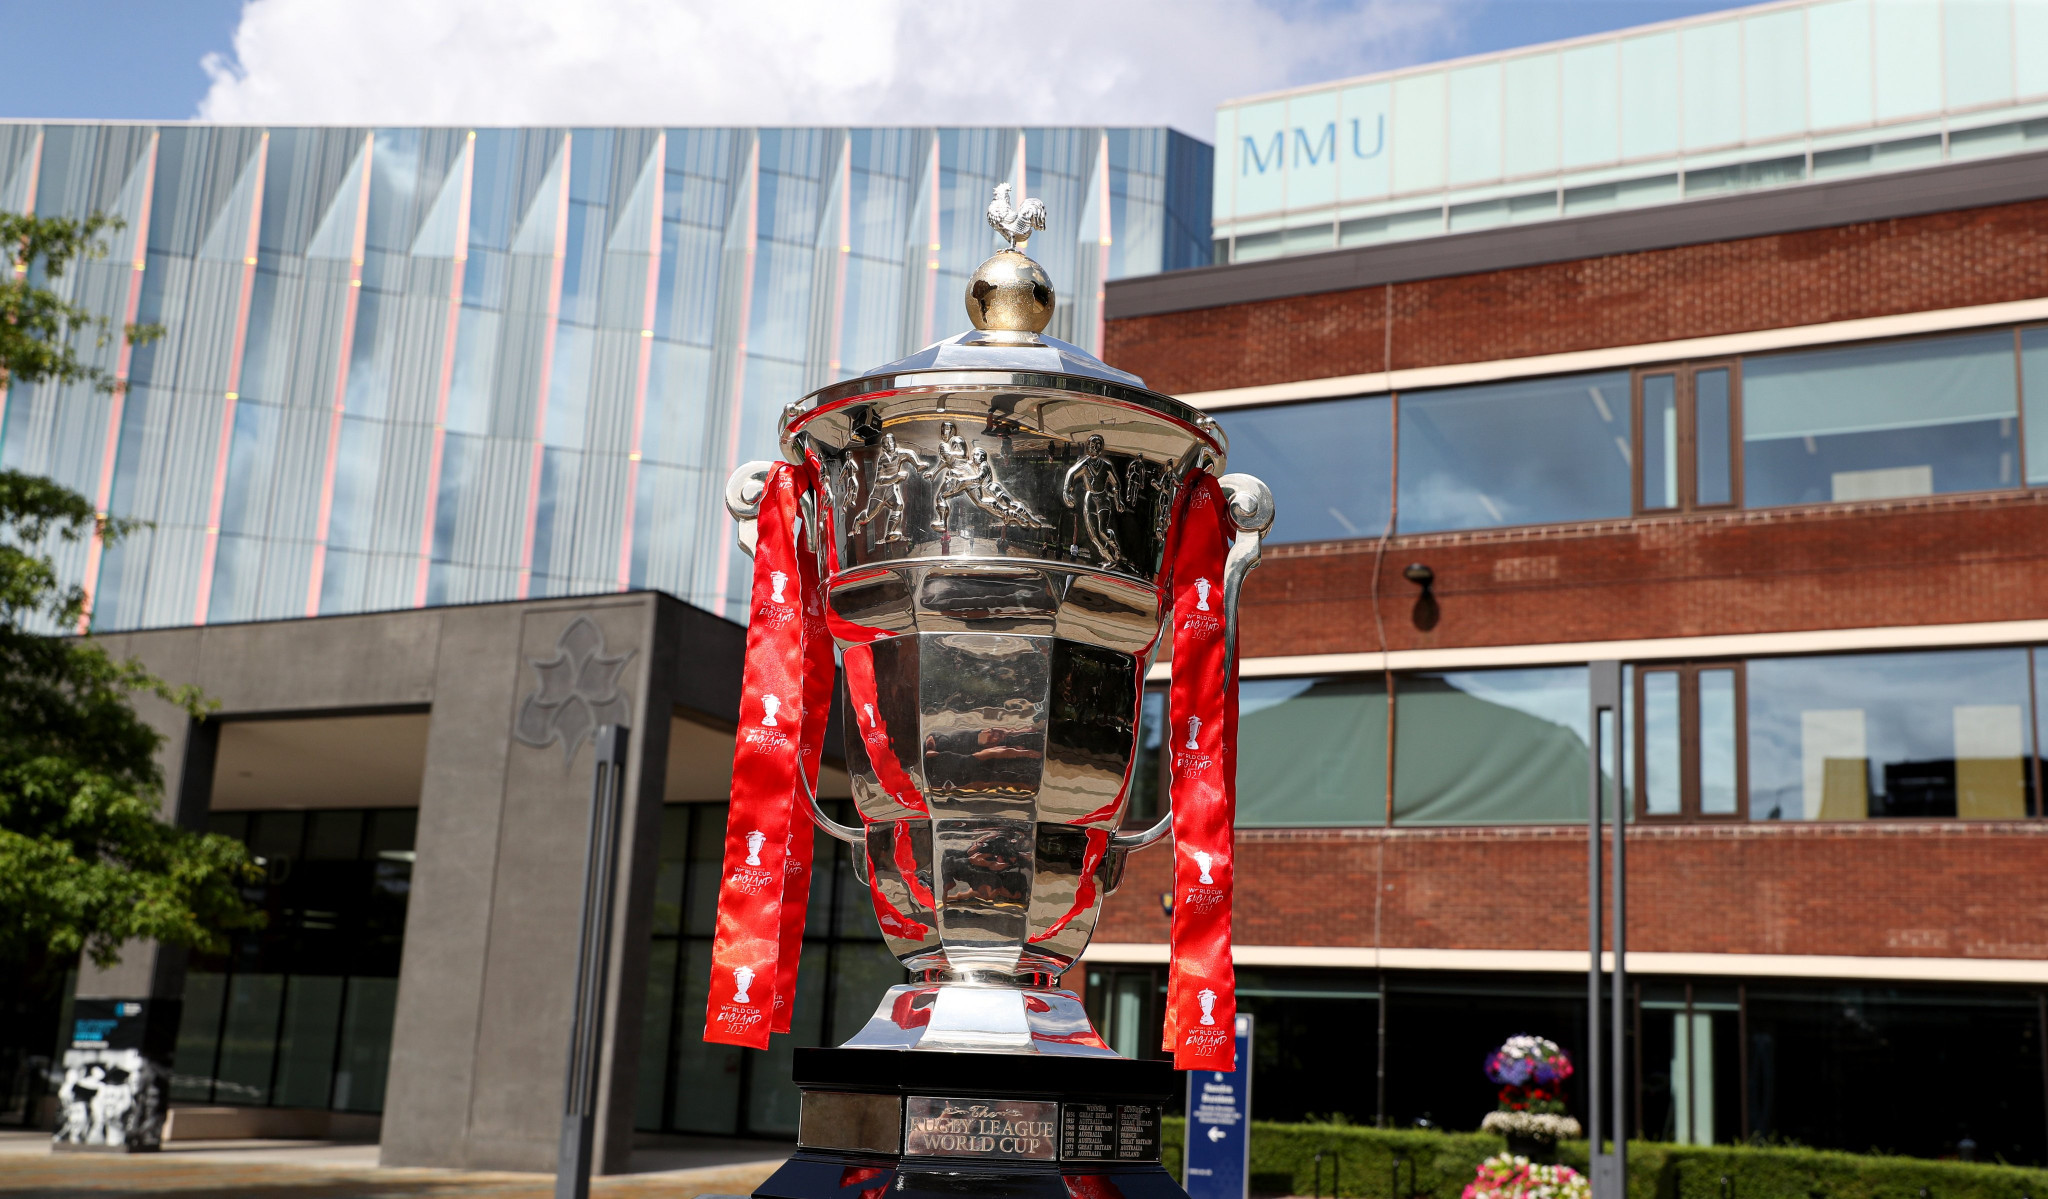 Organisers hope the 2021 Rugby League World Cup will be the most digitally connected sports entertainment event of 2021 ©Getty Images